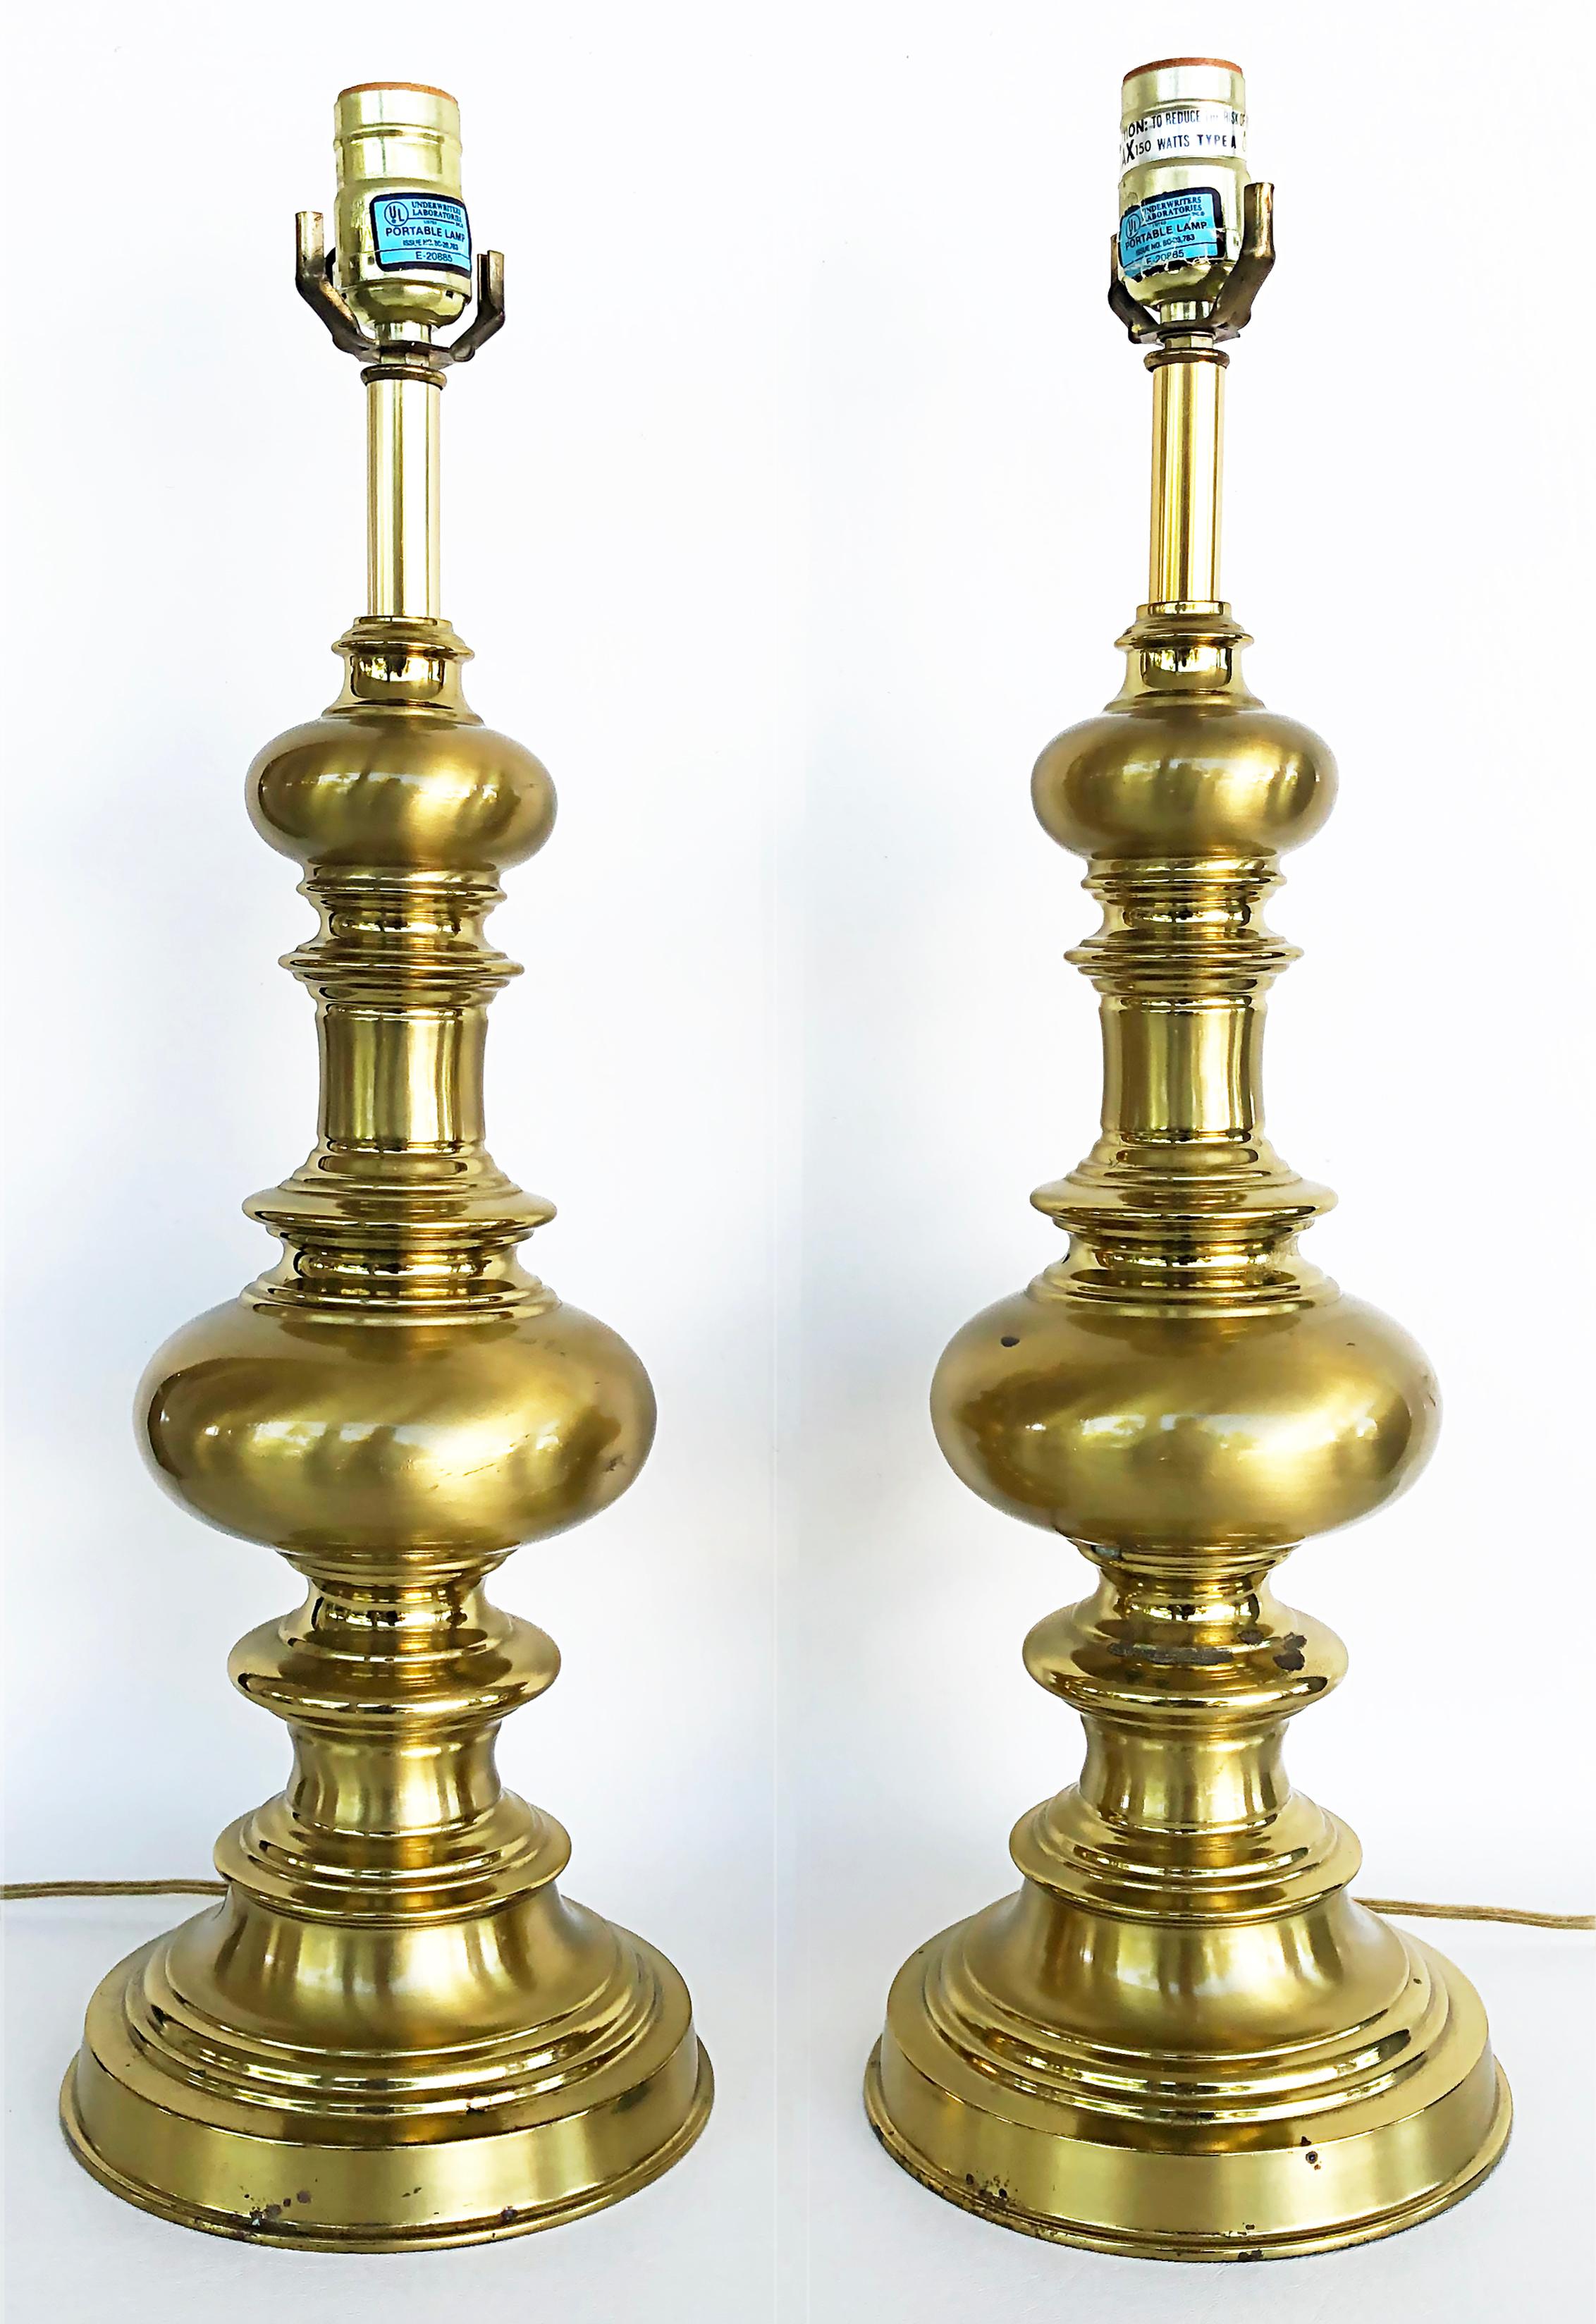 Brass Table Lamps, Pair

Offered for sale is a pair of turned brass table lamps.  Both lamps are wired and have a single socket that accommodates a standard bulb. They are in working condition. There are no shades included.

Height to the top of the